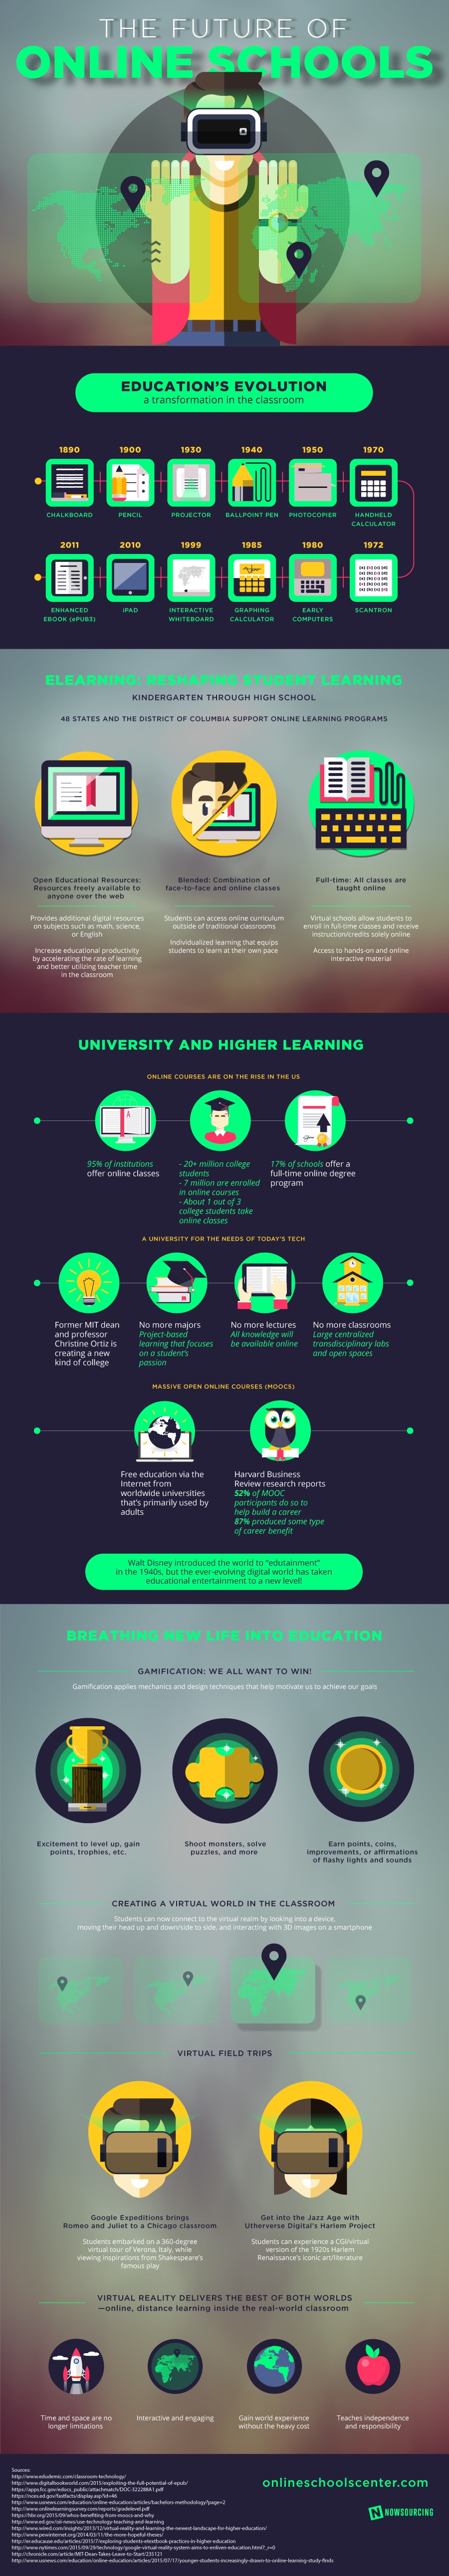 The Future of Online Schools Infographic